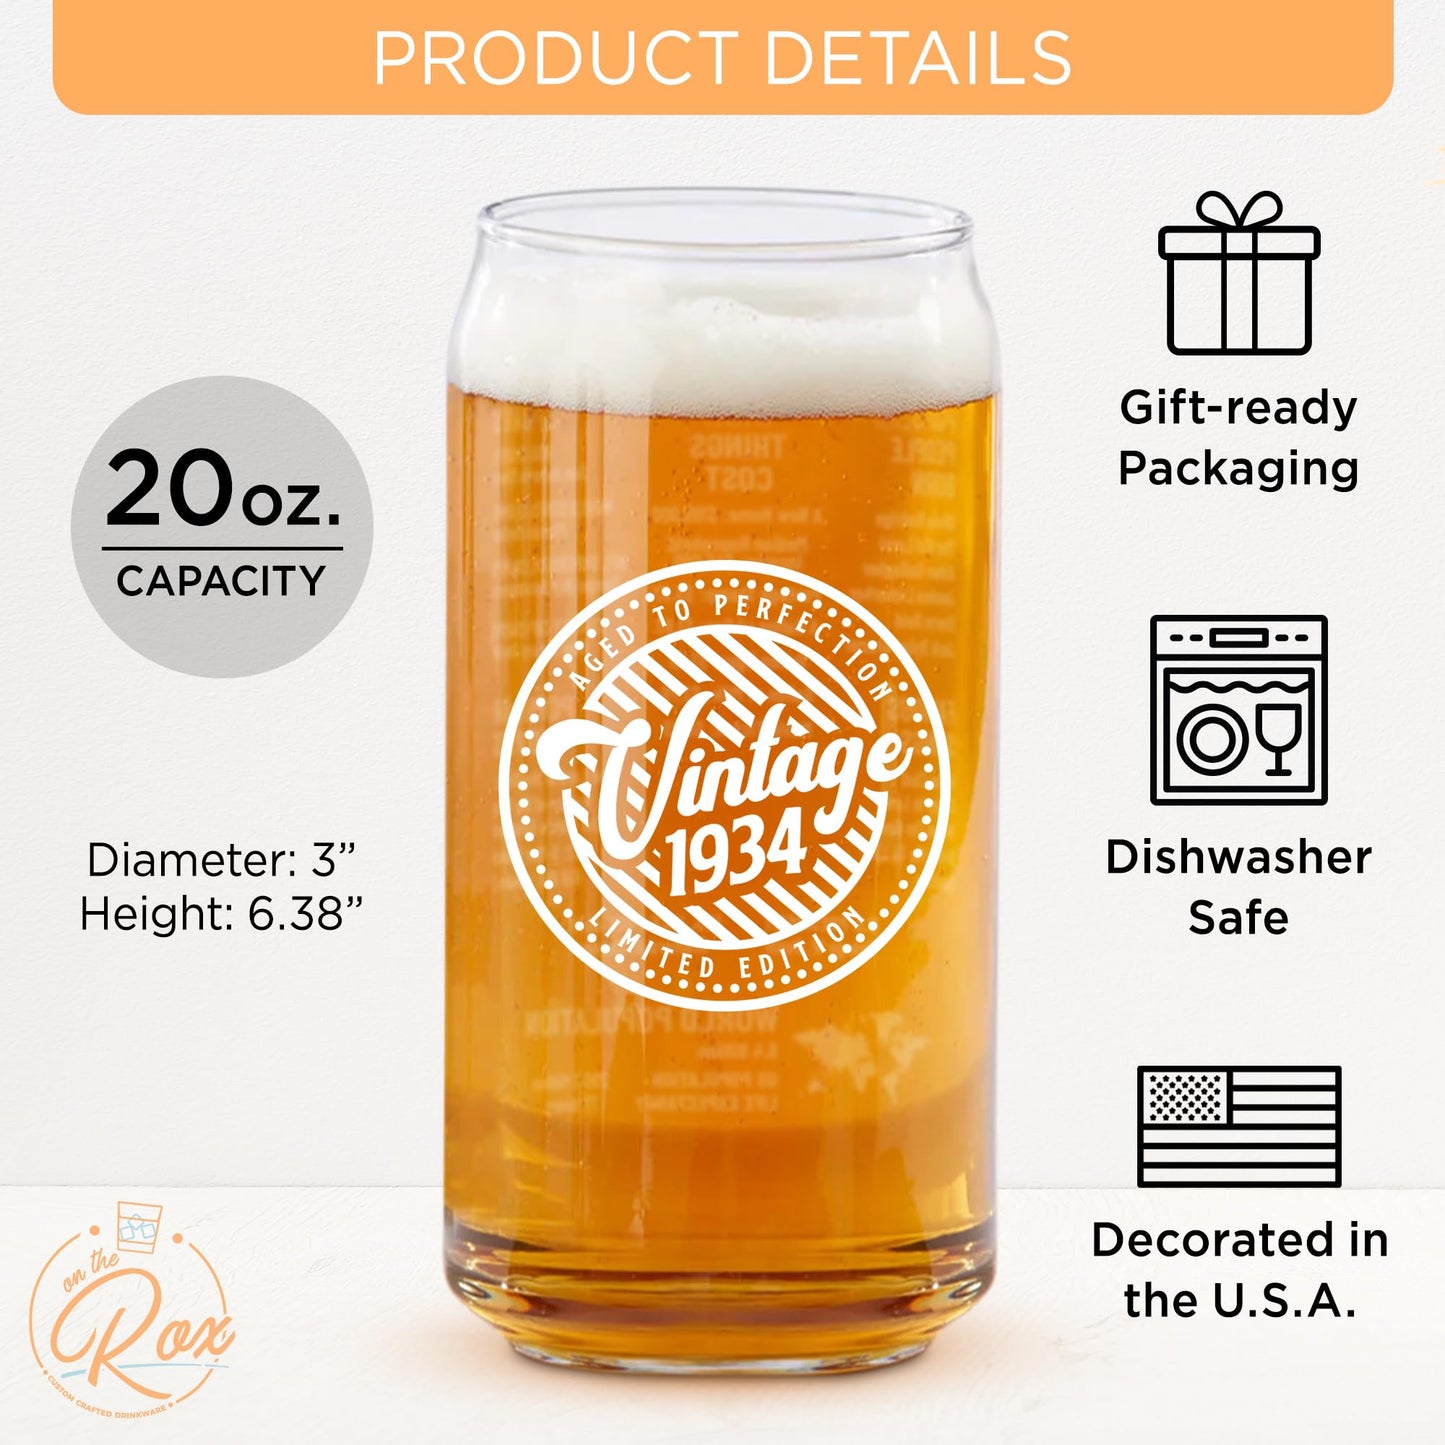 90th Birthday Gifts For Men & Women - Vintage 1934 20 Oz Double-Sided Beer Can Glass (1 Count) - Beer Can Glass Gift for a 90 Year Old Dad, Grandpa - Funny Glass Gift for His or Her 90th Birthday